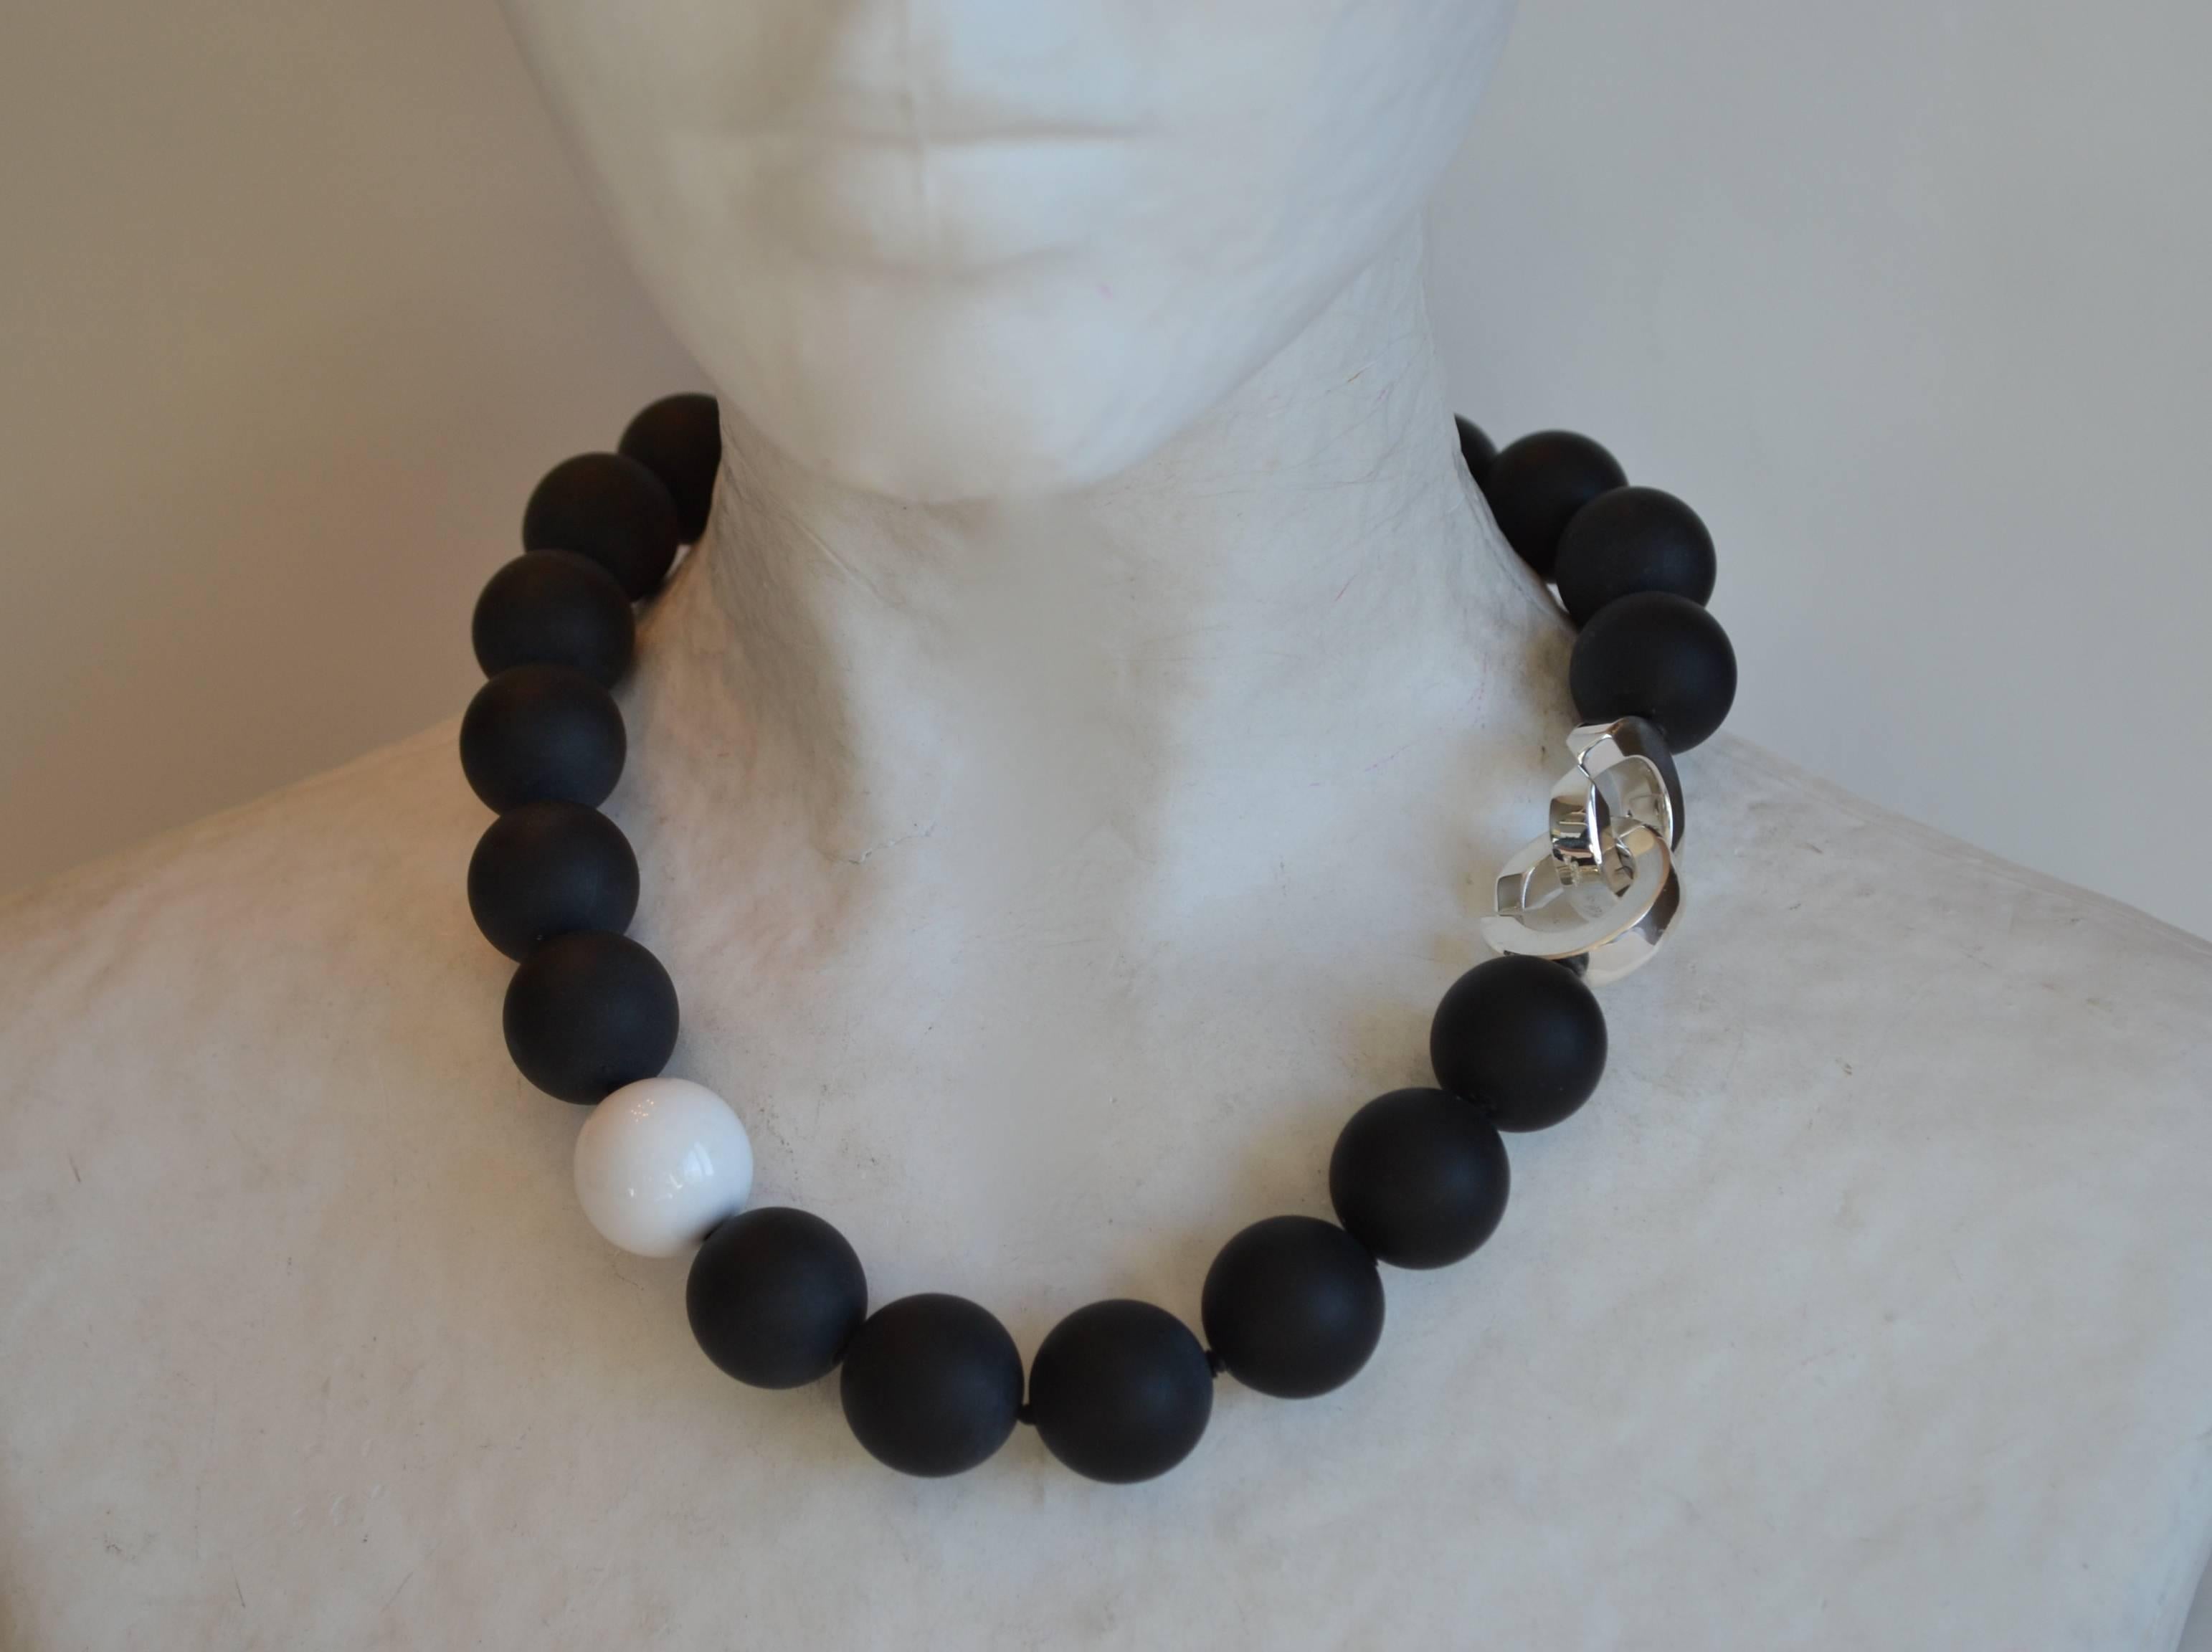 Satin black onyx and white coral bead necklace with solid sterling silver clasp from Patricia von Musulin. 